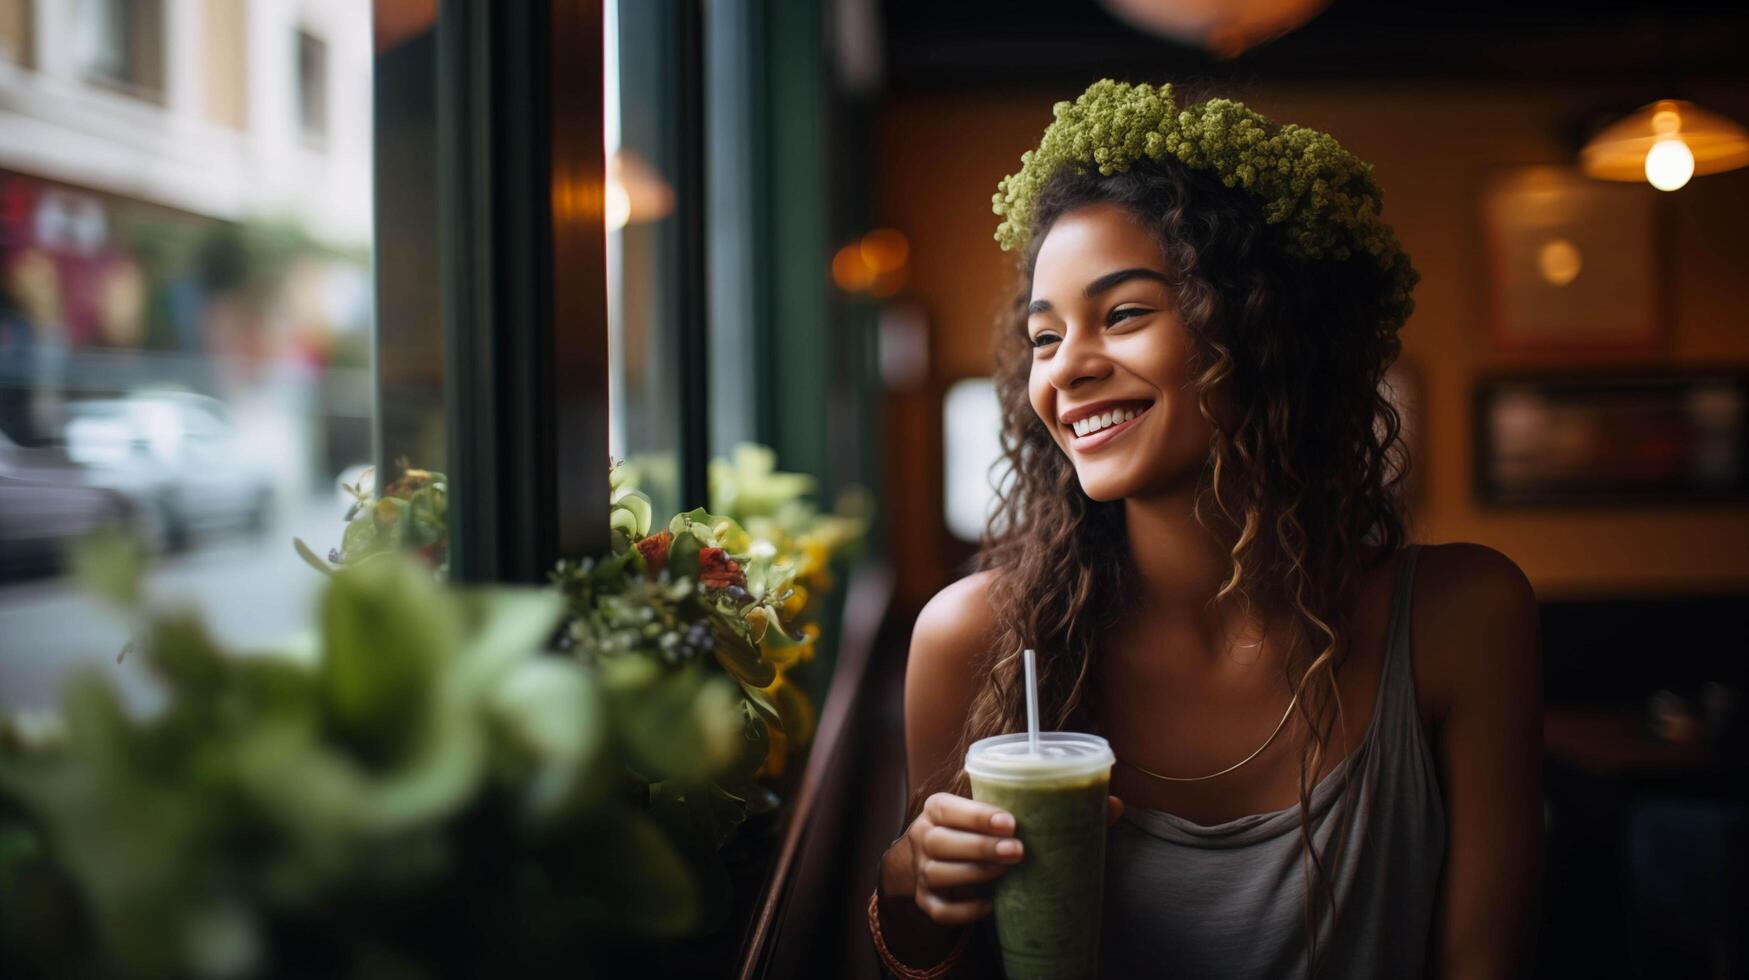 AI generated A charming young lady radiating joy as she enjoys a verdant green smoothie in a quaint cafe setting, with large windows overlooking a bustling city street photo